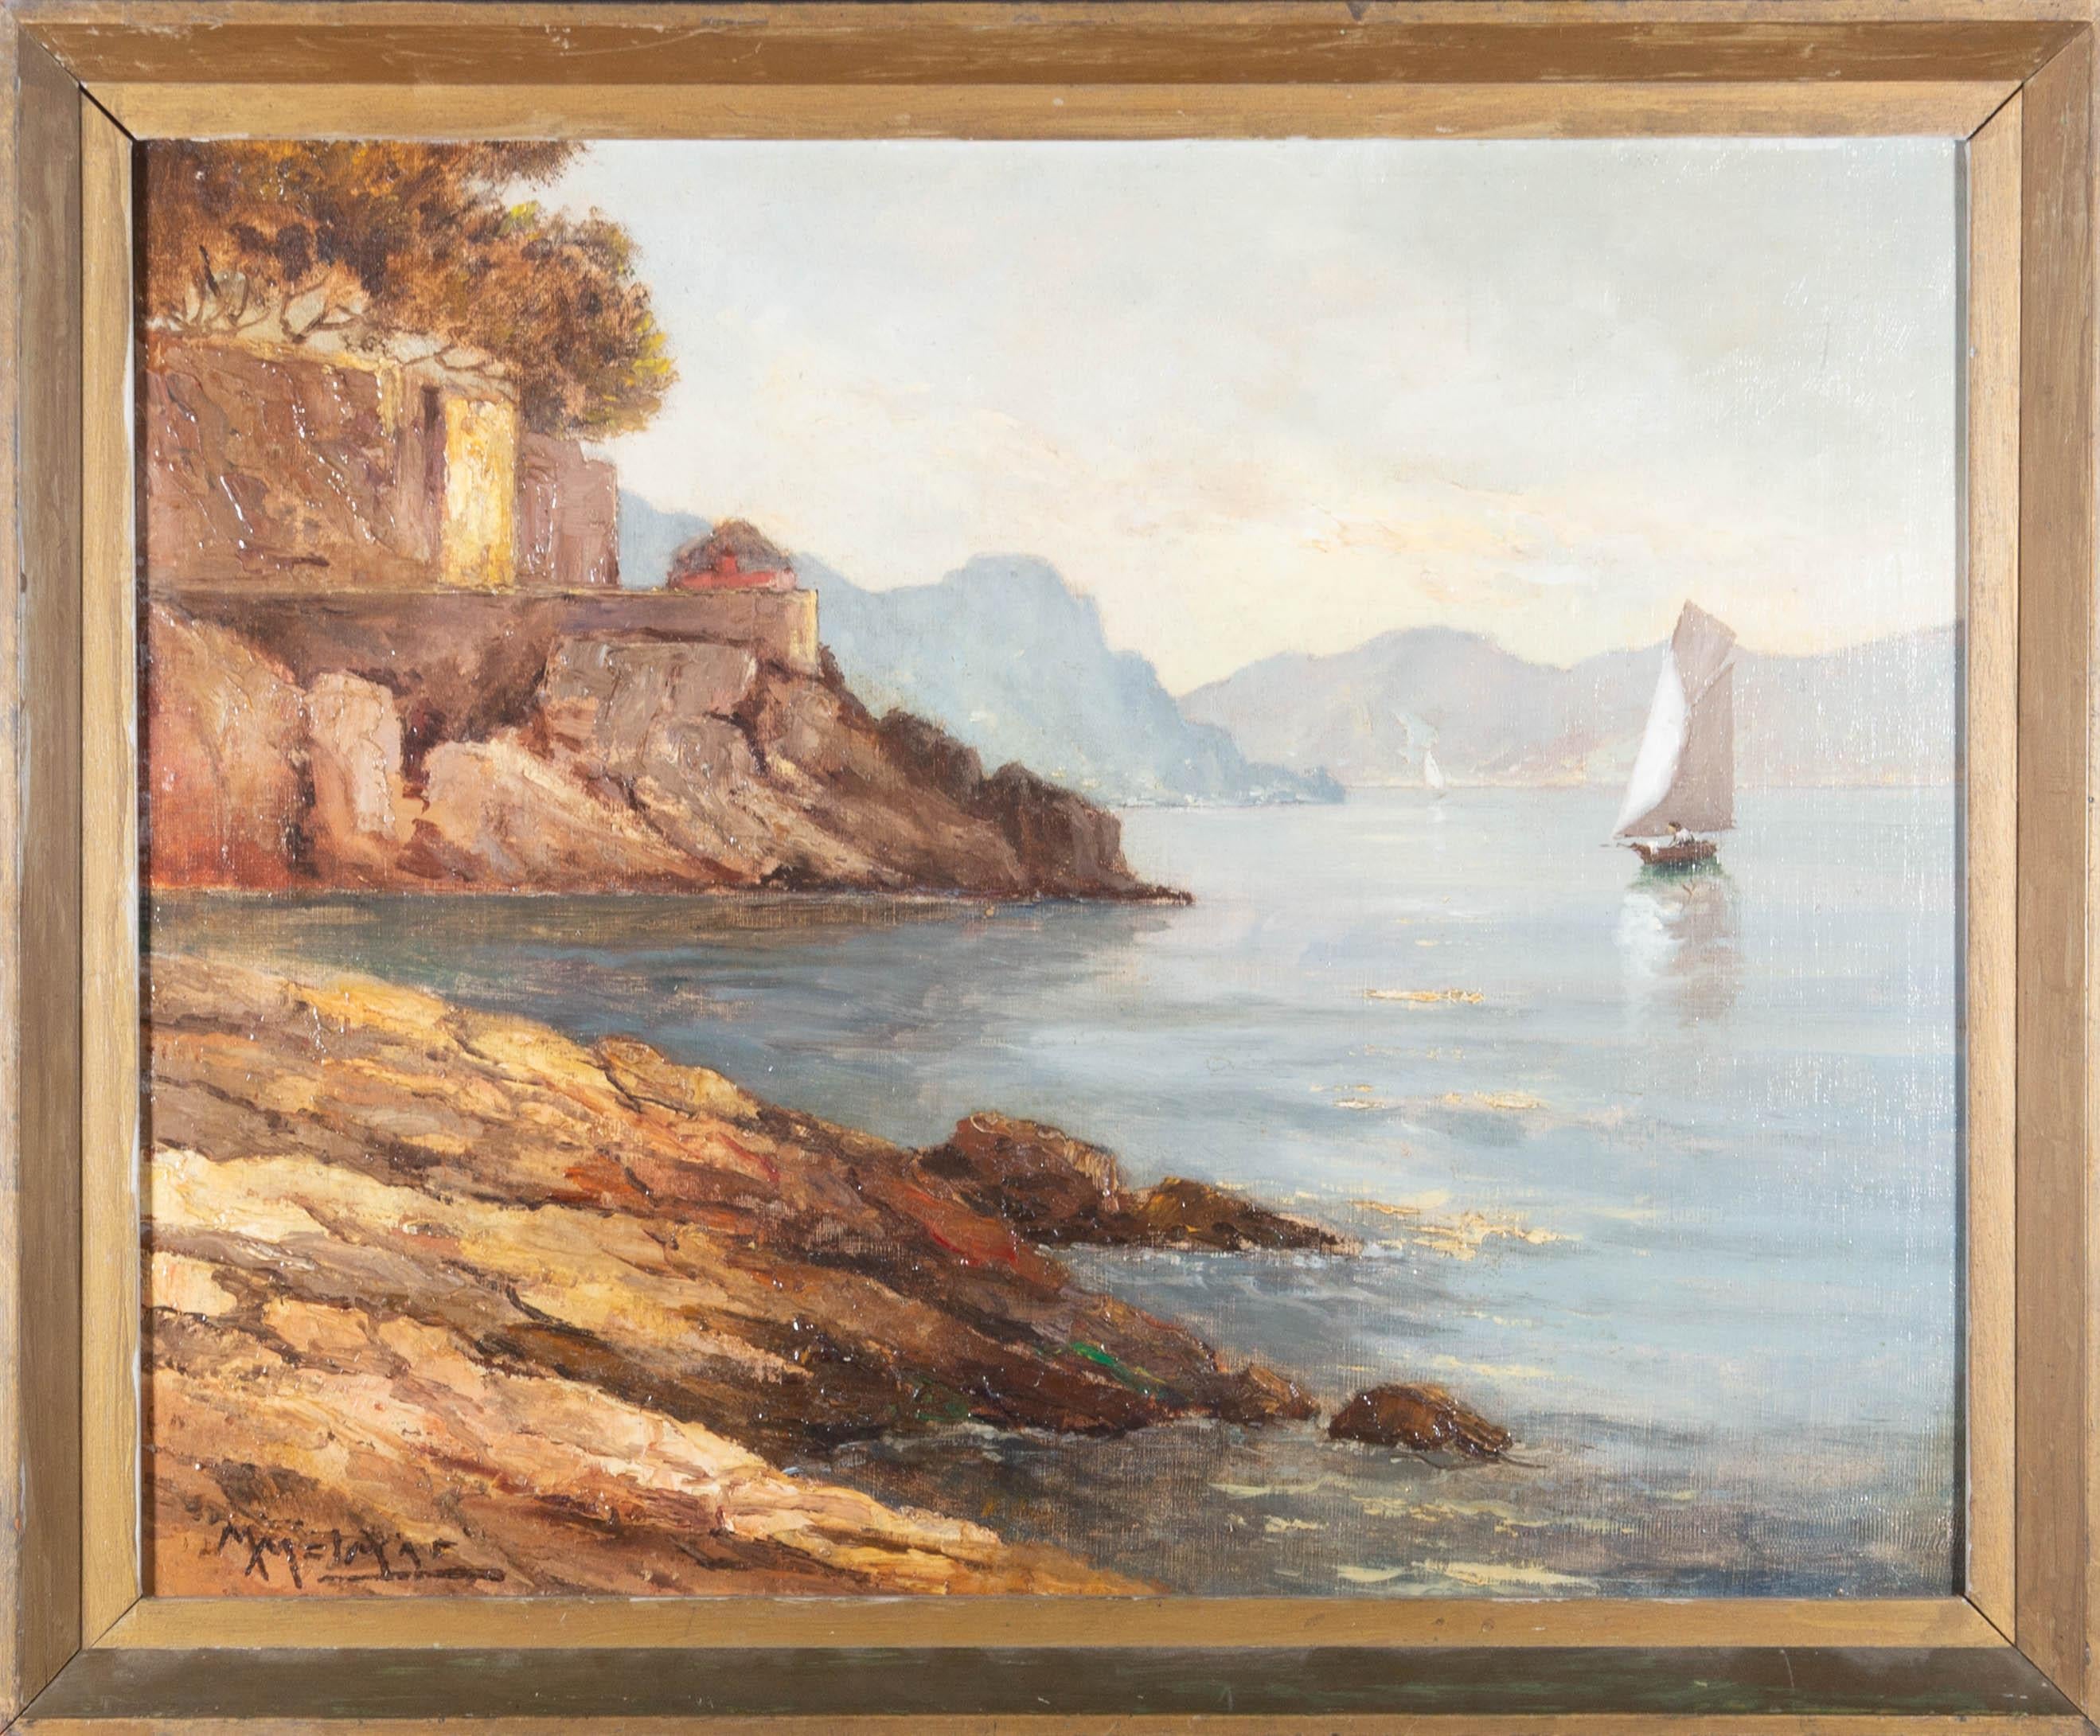 A warm and atmospheric painting with impasto depicting a view across an Italian lake. A sailing boat travels across the still water to the right of the composition. Presented in a distressed gold-painted wooden frame. Signed to the lower-left edge.